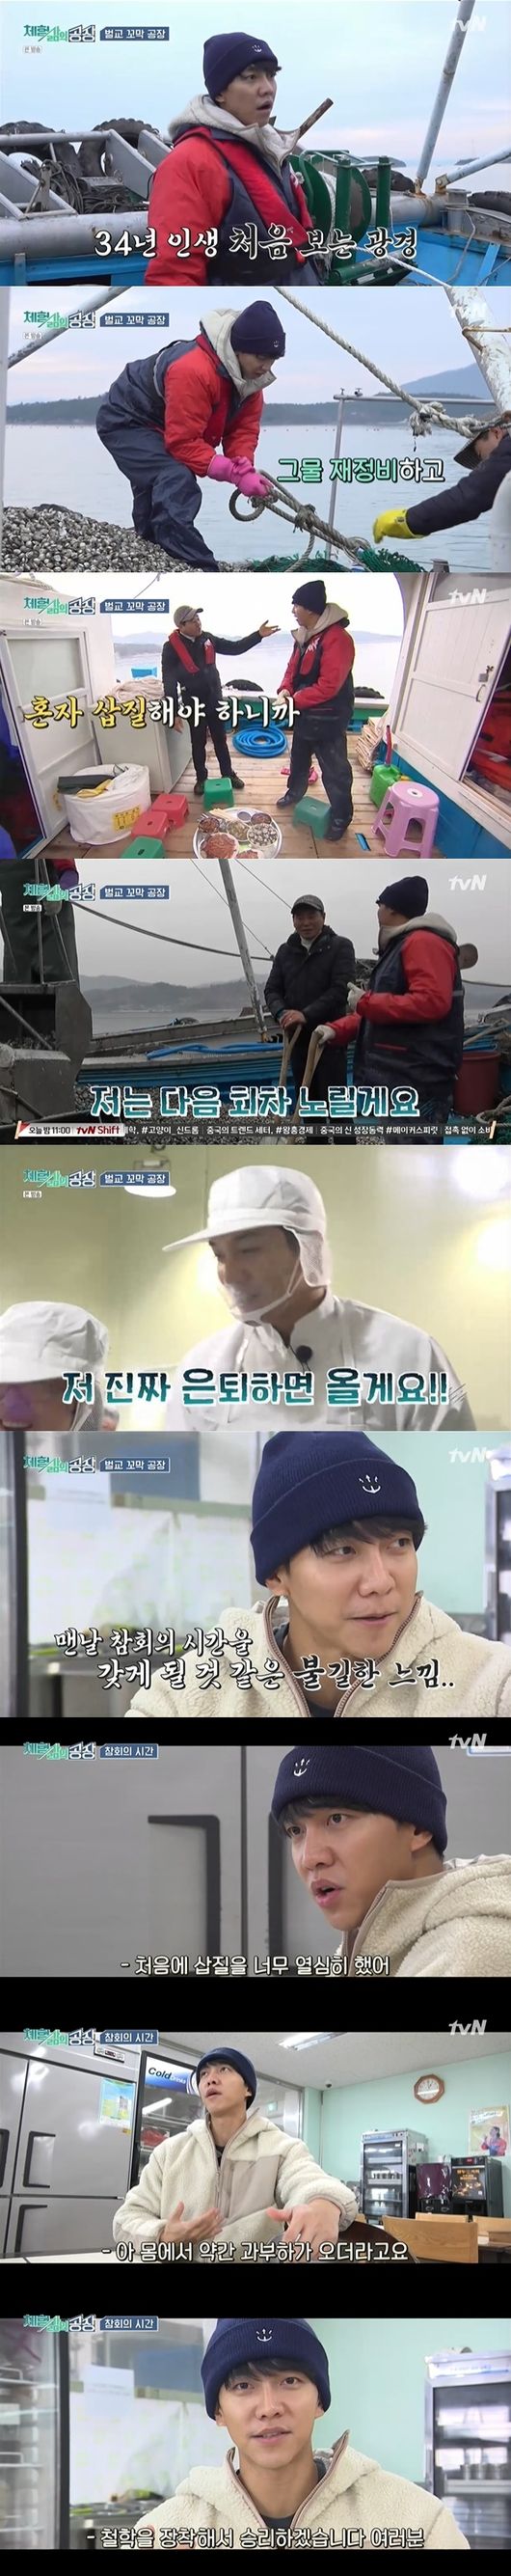 Friday Friday night presented various corners that satisfy the various tastes of viewers.On the afternoon of the 10th, TVN Friday Friday night, the entertainment combination that believes in Eun Ji-won to Lee Seung-gi made a big smile.Friday Friday Night is a program in which six short-form corners of different materials, including labor, cooking, science, art, travel, and sports, are made up of omnibus formats.Short, different themes of about 10 minutes gave viewers a boring fun.Na Young-Seok PD, Shishi Sekisui Sea Ranch and Spanish boarding Jang Eun-jung PD co-directed.On this day, there are six corners from Hong Jin-kyungs My Friends Recipe to Eun Ji-won, Song Min-ho, Jang Doyeons Scienceful Science Country, New York City of Lee Seo-jin, Park Ji-yoon Announcer and Han Jun-hees  Its been released.Professor Kim Sang-wook and Professor Yang Jung-moo, who appeared in Alsul Shin-Job 3 and How Do You Adult, appeared in The Wonderful Science Country and The Wonderful Art Country respectively.Professor Kim Sang-wook has unravelled his expertise, science common sense, to three people, Eun Ji-won, Song Min-ho and Jang Doyeon, through A Wonderful Science Country.Eun Ji-won said, I wonder what physics and creatures are, There was a great debate before you came: does a cold not catch in cold places, in the Arctic or Antarctica?I asked the wrong question.In addition, Professor Yang Jung-moo talked about common sense of art in New Art Country.Jang Doyeon said, I want to know the most expensive painting in Korea. Professor Yang Jung-moo said, The work of Kim Hwan-kis universe was traded at 13.1 billion won at the auction of Korean art, and it was not revealed yet because it was personal information. Science and art education, which are explained at the eye level of the three people, have become more interesting to see as they are well-informed by viewers.Lee Seung-gi has co-worked with Na Young-Seok PD for a long time since 1 night and 2 days through Factory of Experience Life.Lee Seung-gi, who found the factory in the hillside, caught a birdtail on a boat: Why is this dress youre wearing now, all this familiar? Rubber gloves are familiar. Theres no sense of heterogeneity.I was in Seoul for a long time and I tried to take a sophisticated image. Lee Seung-gi, who was enthusiastic about cutting the cobblestone, exhausted his physical strength at the beginning of the shoot and said, This is the first shot and a total of 15 minutes, and the boss is likely to go out for seven minutes.Im looking for the next episode, he said.Fortunately, Lee Seung-gi, who discovered his aptitude at the factory, said, I will come when I retire. I found my talent here. This was my job. I found a new aptitude.Lee Seung-gi, who evaluated the first recording, said, I think I will have time for penance every time. There was a problem with the distribution of power.The representative came in for a moment of tiredness, and I worked and said like an audience. My labor had no philosophy and faith.I lost my first recording, and in the second round, I will win with philosophy until Lee No-dong becomes Lee No-dong, not Lee Seung-gi Friday night captures the broadcast screen